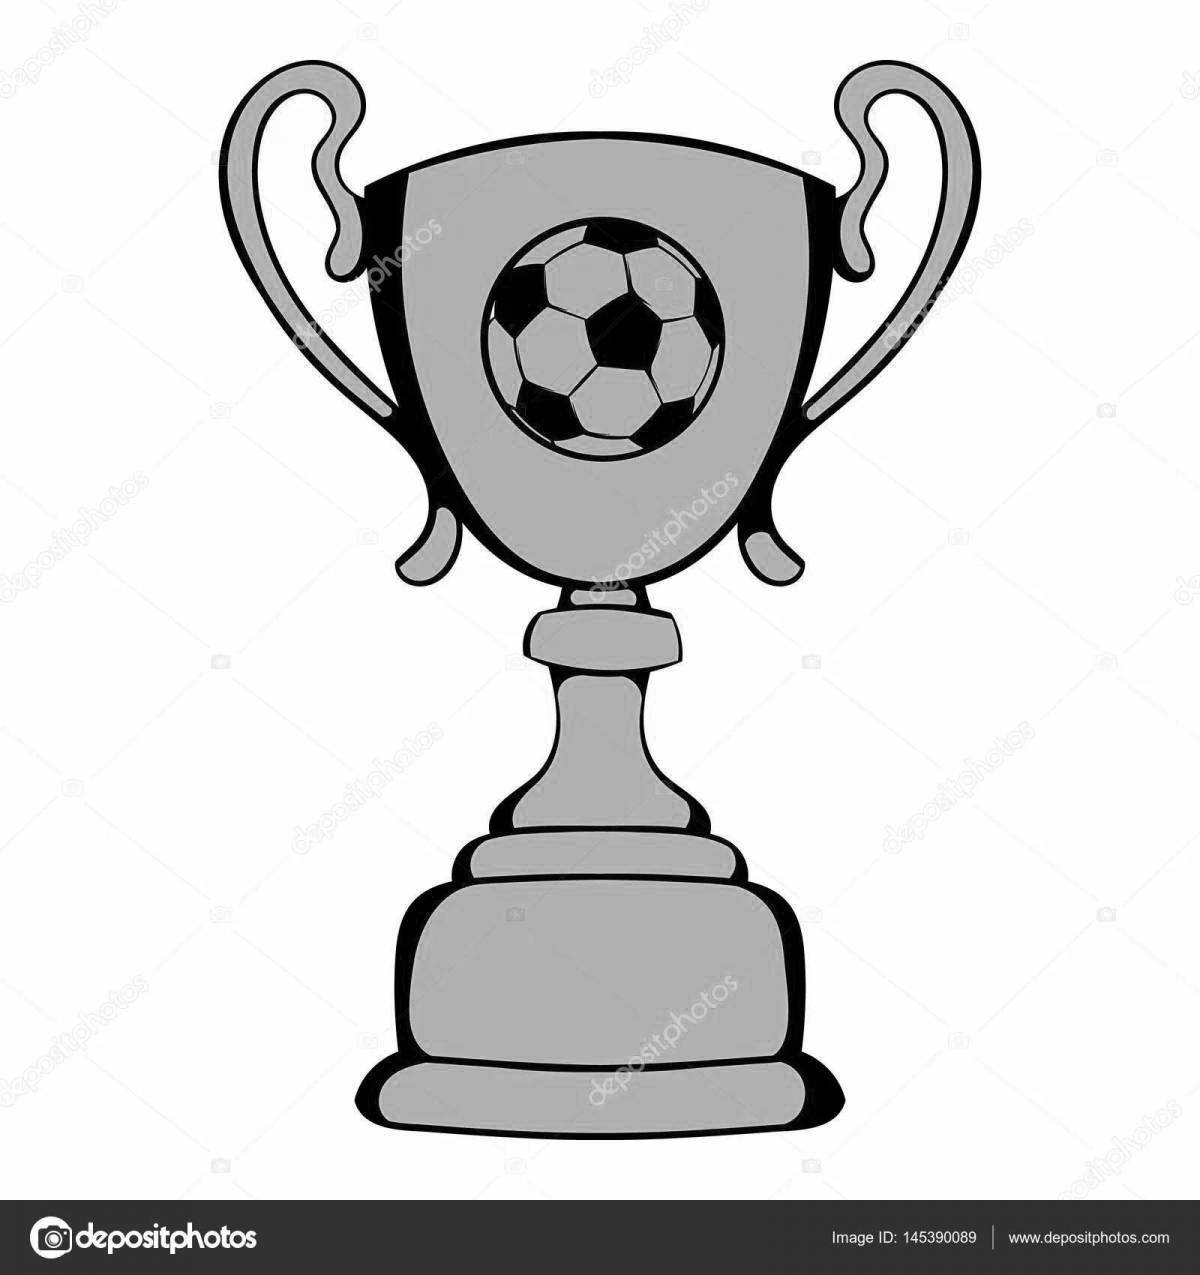 Coloring page adorable football cup